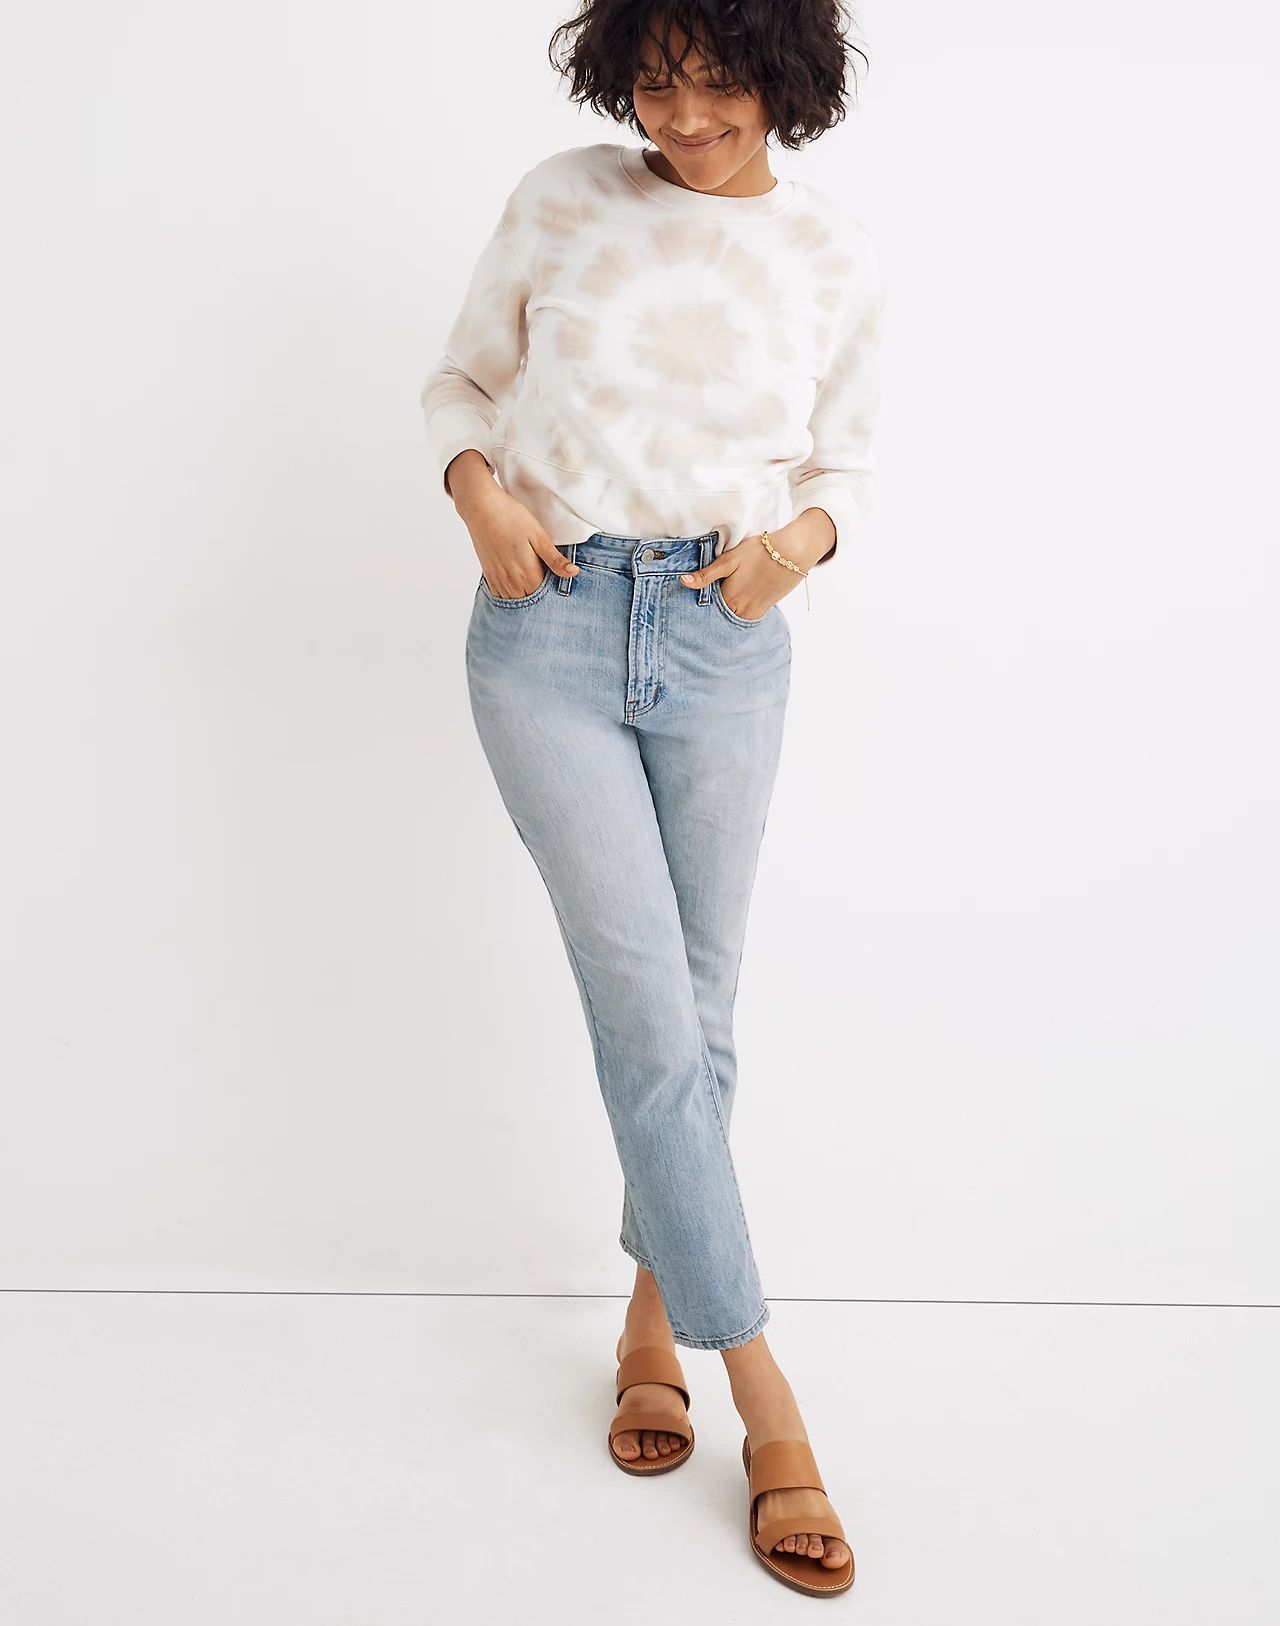 The Curvy Perfect Vintage Jean in Fitzgerald Wash | Madewell